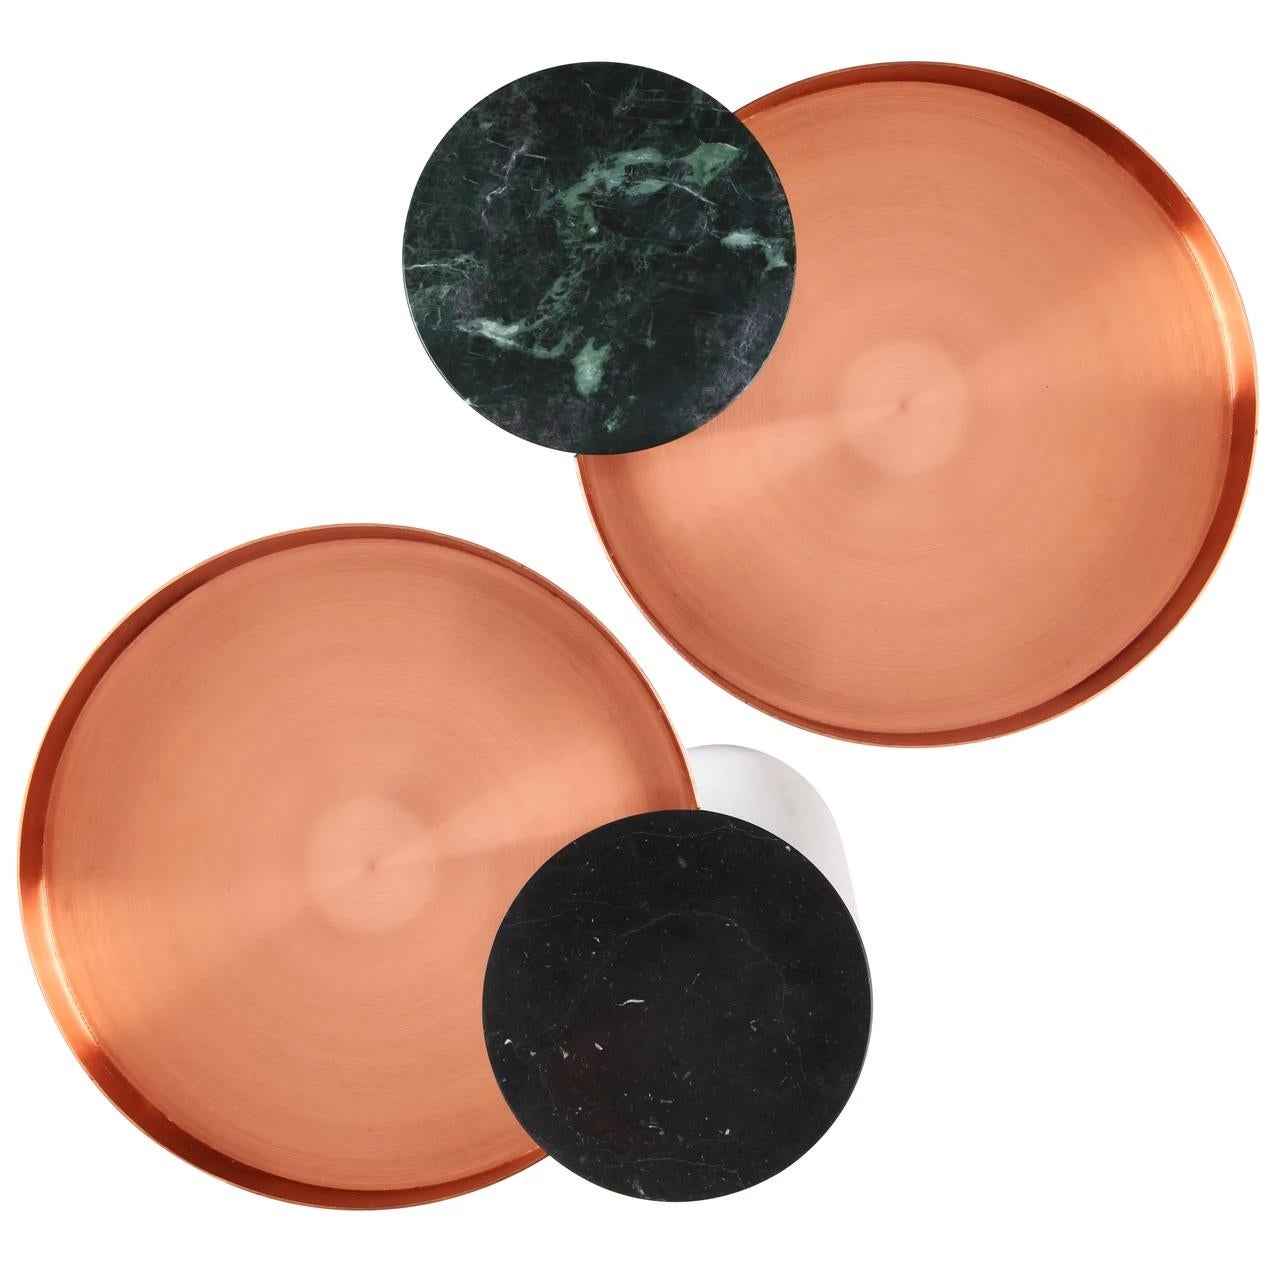 Pair of contemporary Gueridons - Sebastian Herkner

The Salute table exists in 3 sizes, 3 different marbles for the column and 4 different finishes for the tray for a virtually endless number of configurations. In addition, Salute can be made